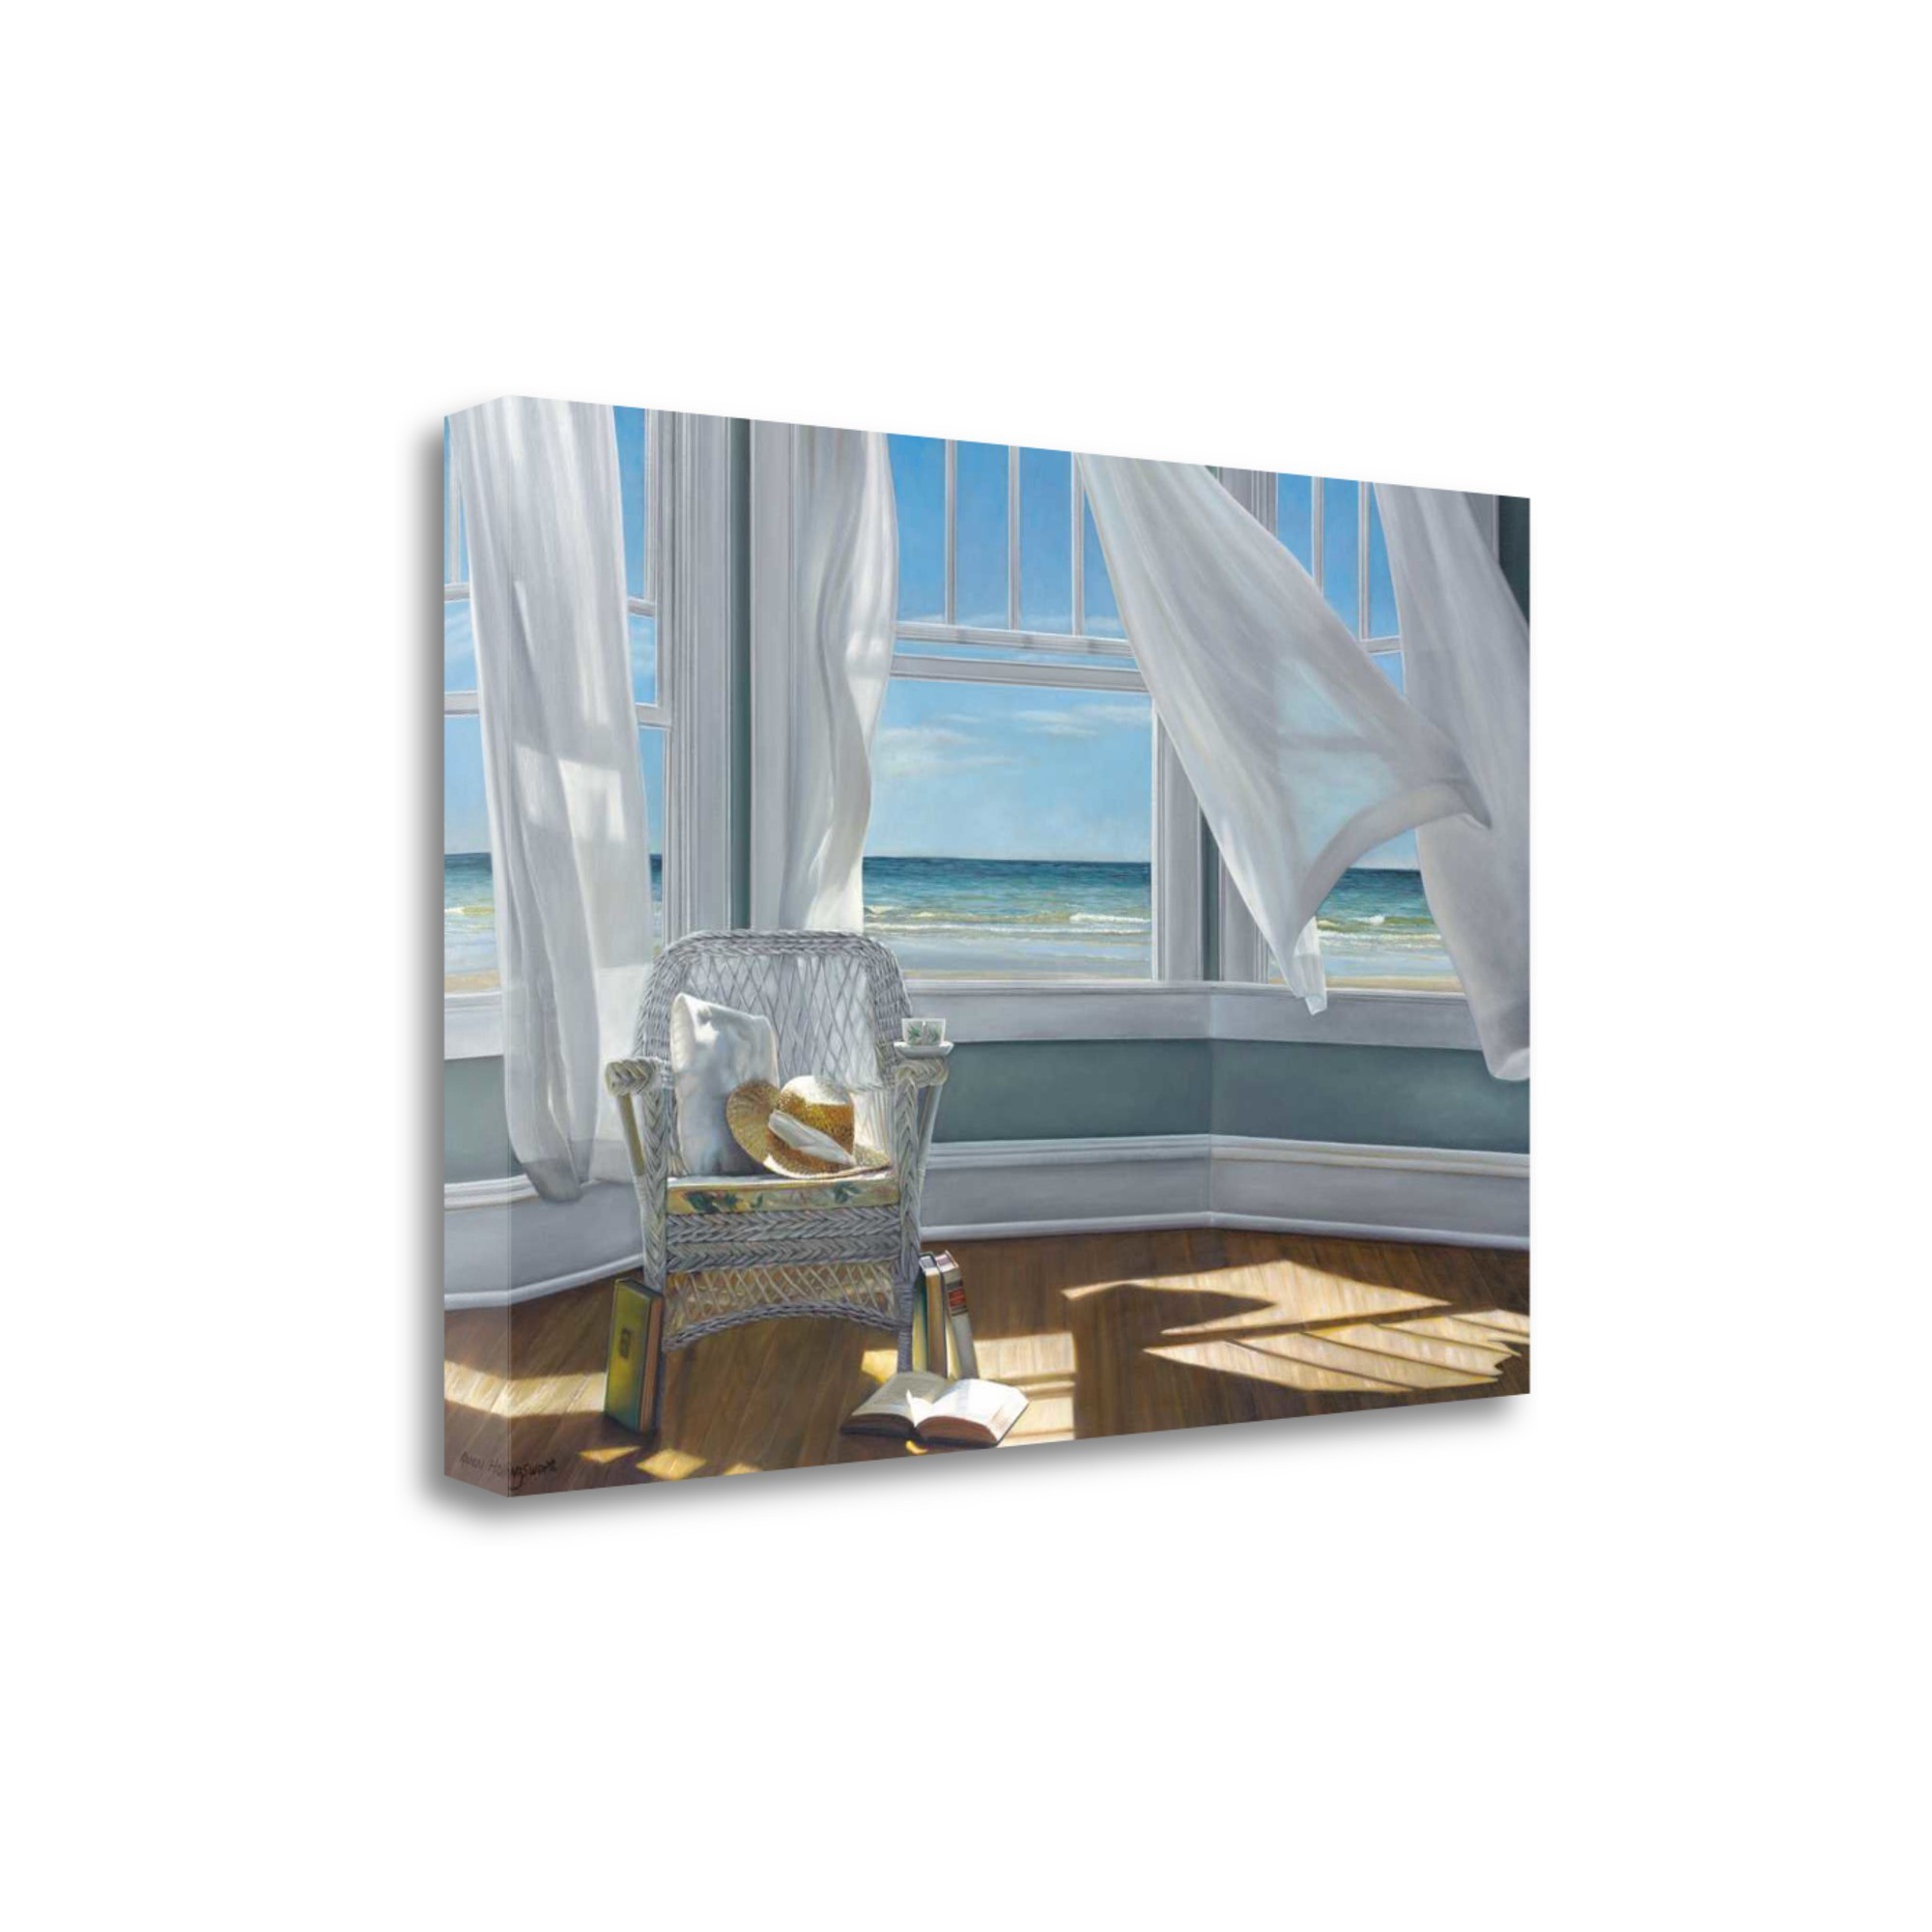 Reading Spot With Beach View 5 Giclee Wrap Canvas Wall Art